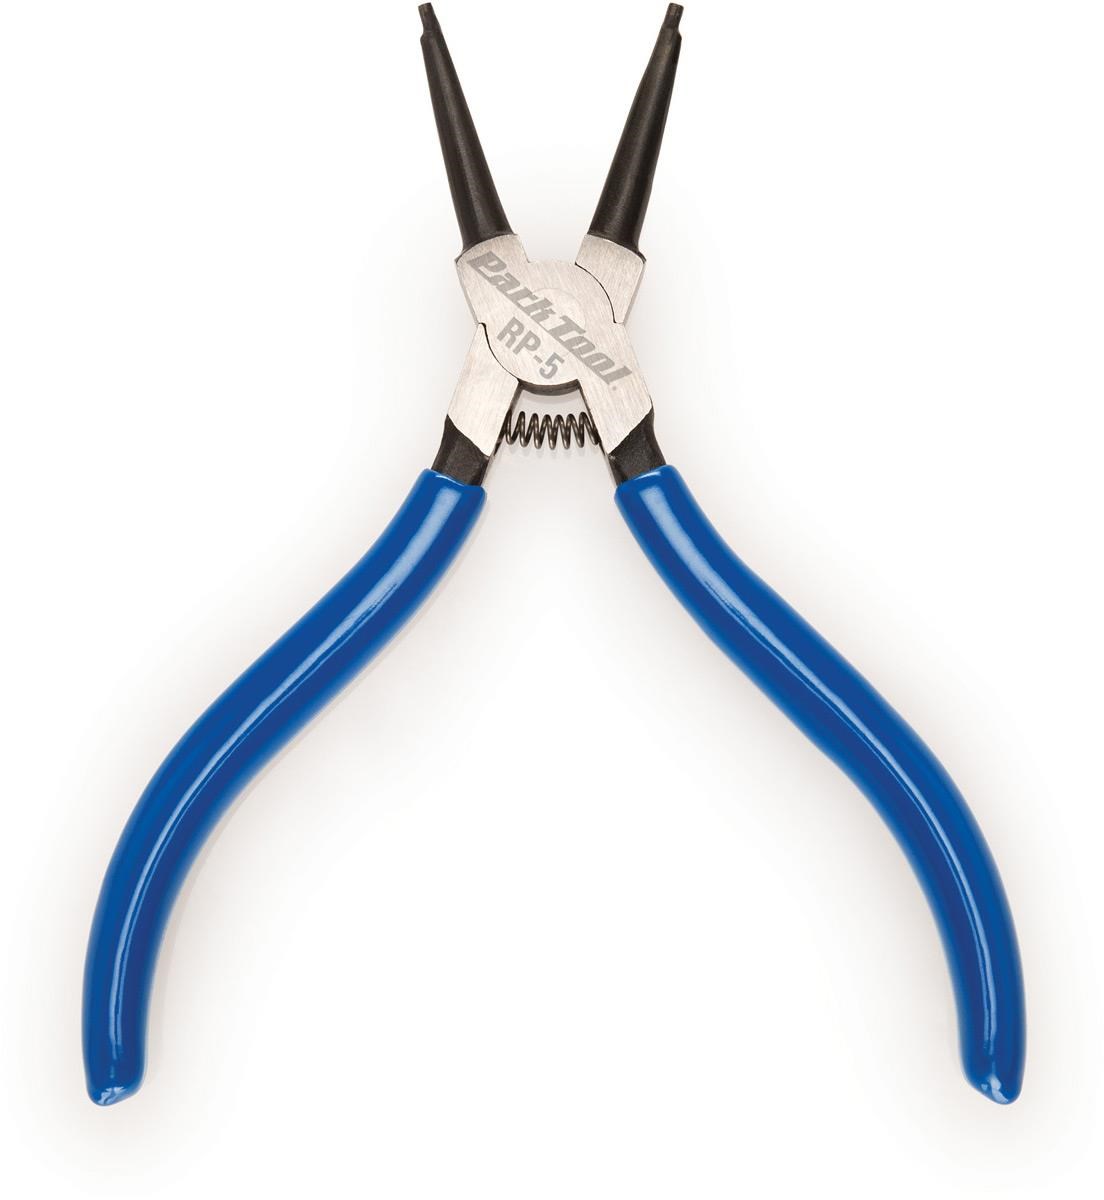 Park Tool RP-5 - Snap Ring (Circlip) Pliers - 1.7mm Straight Internal product image